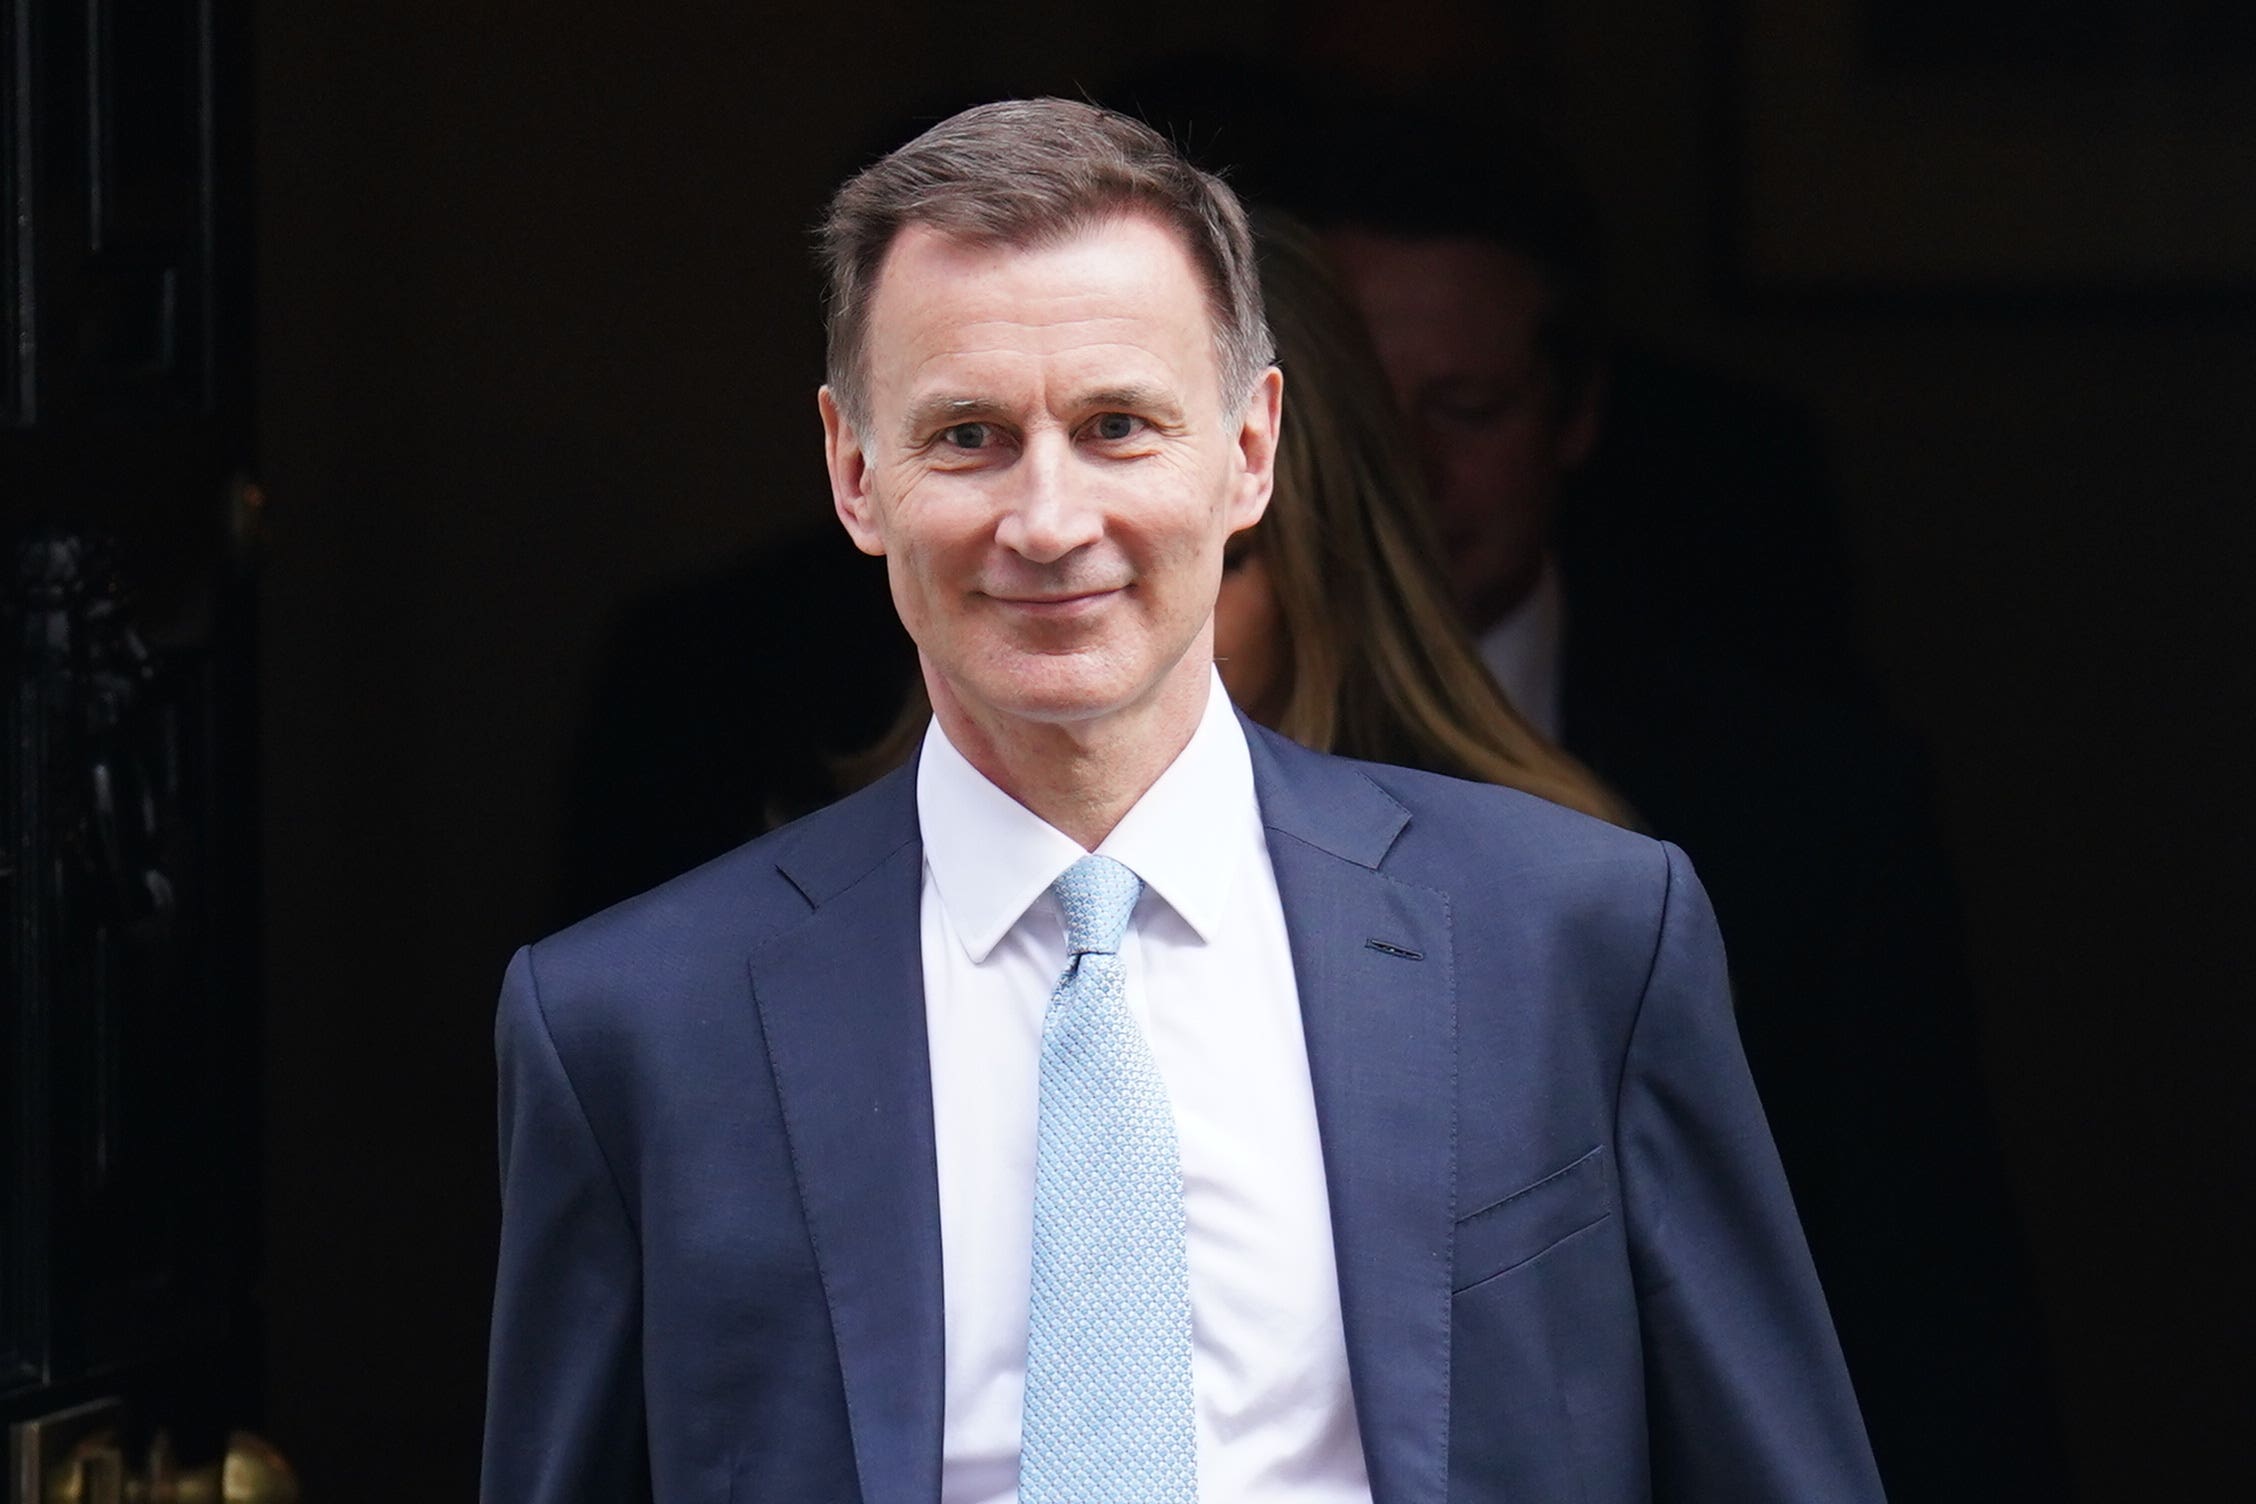 Chancellor of the Exchequer Jeremy Hunt would lose his seat according to the mega-poll (James Manning/PA)